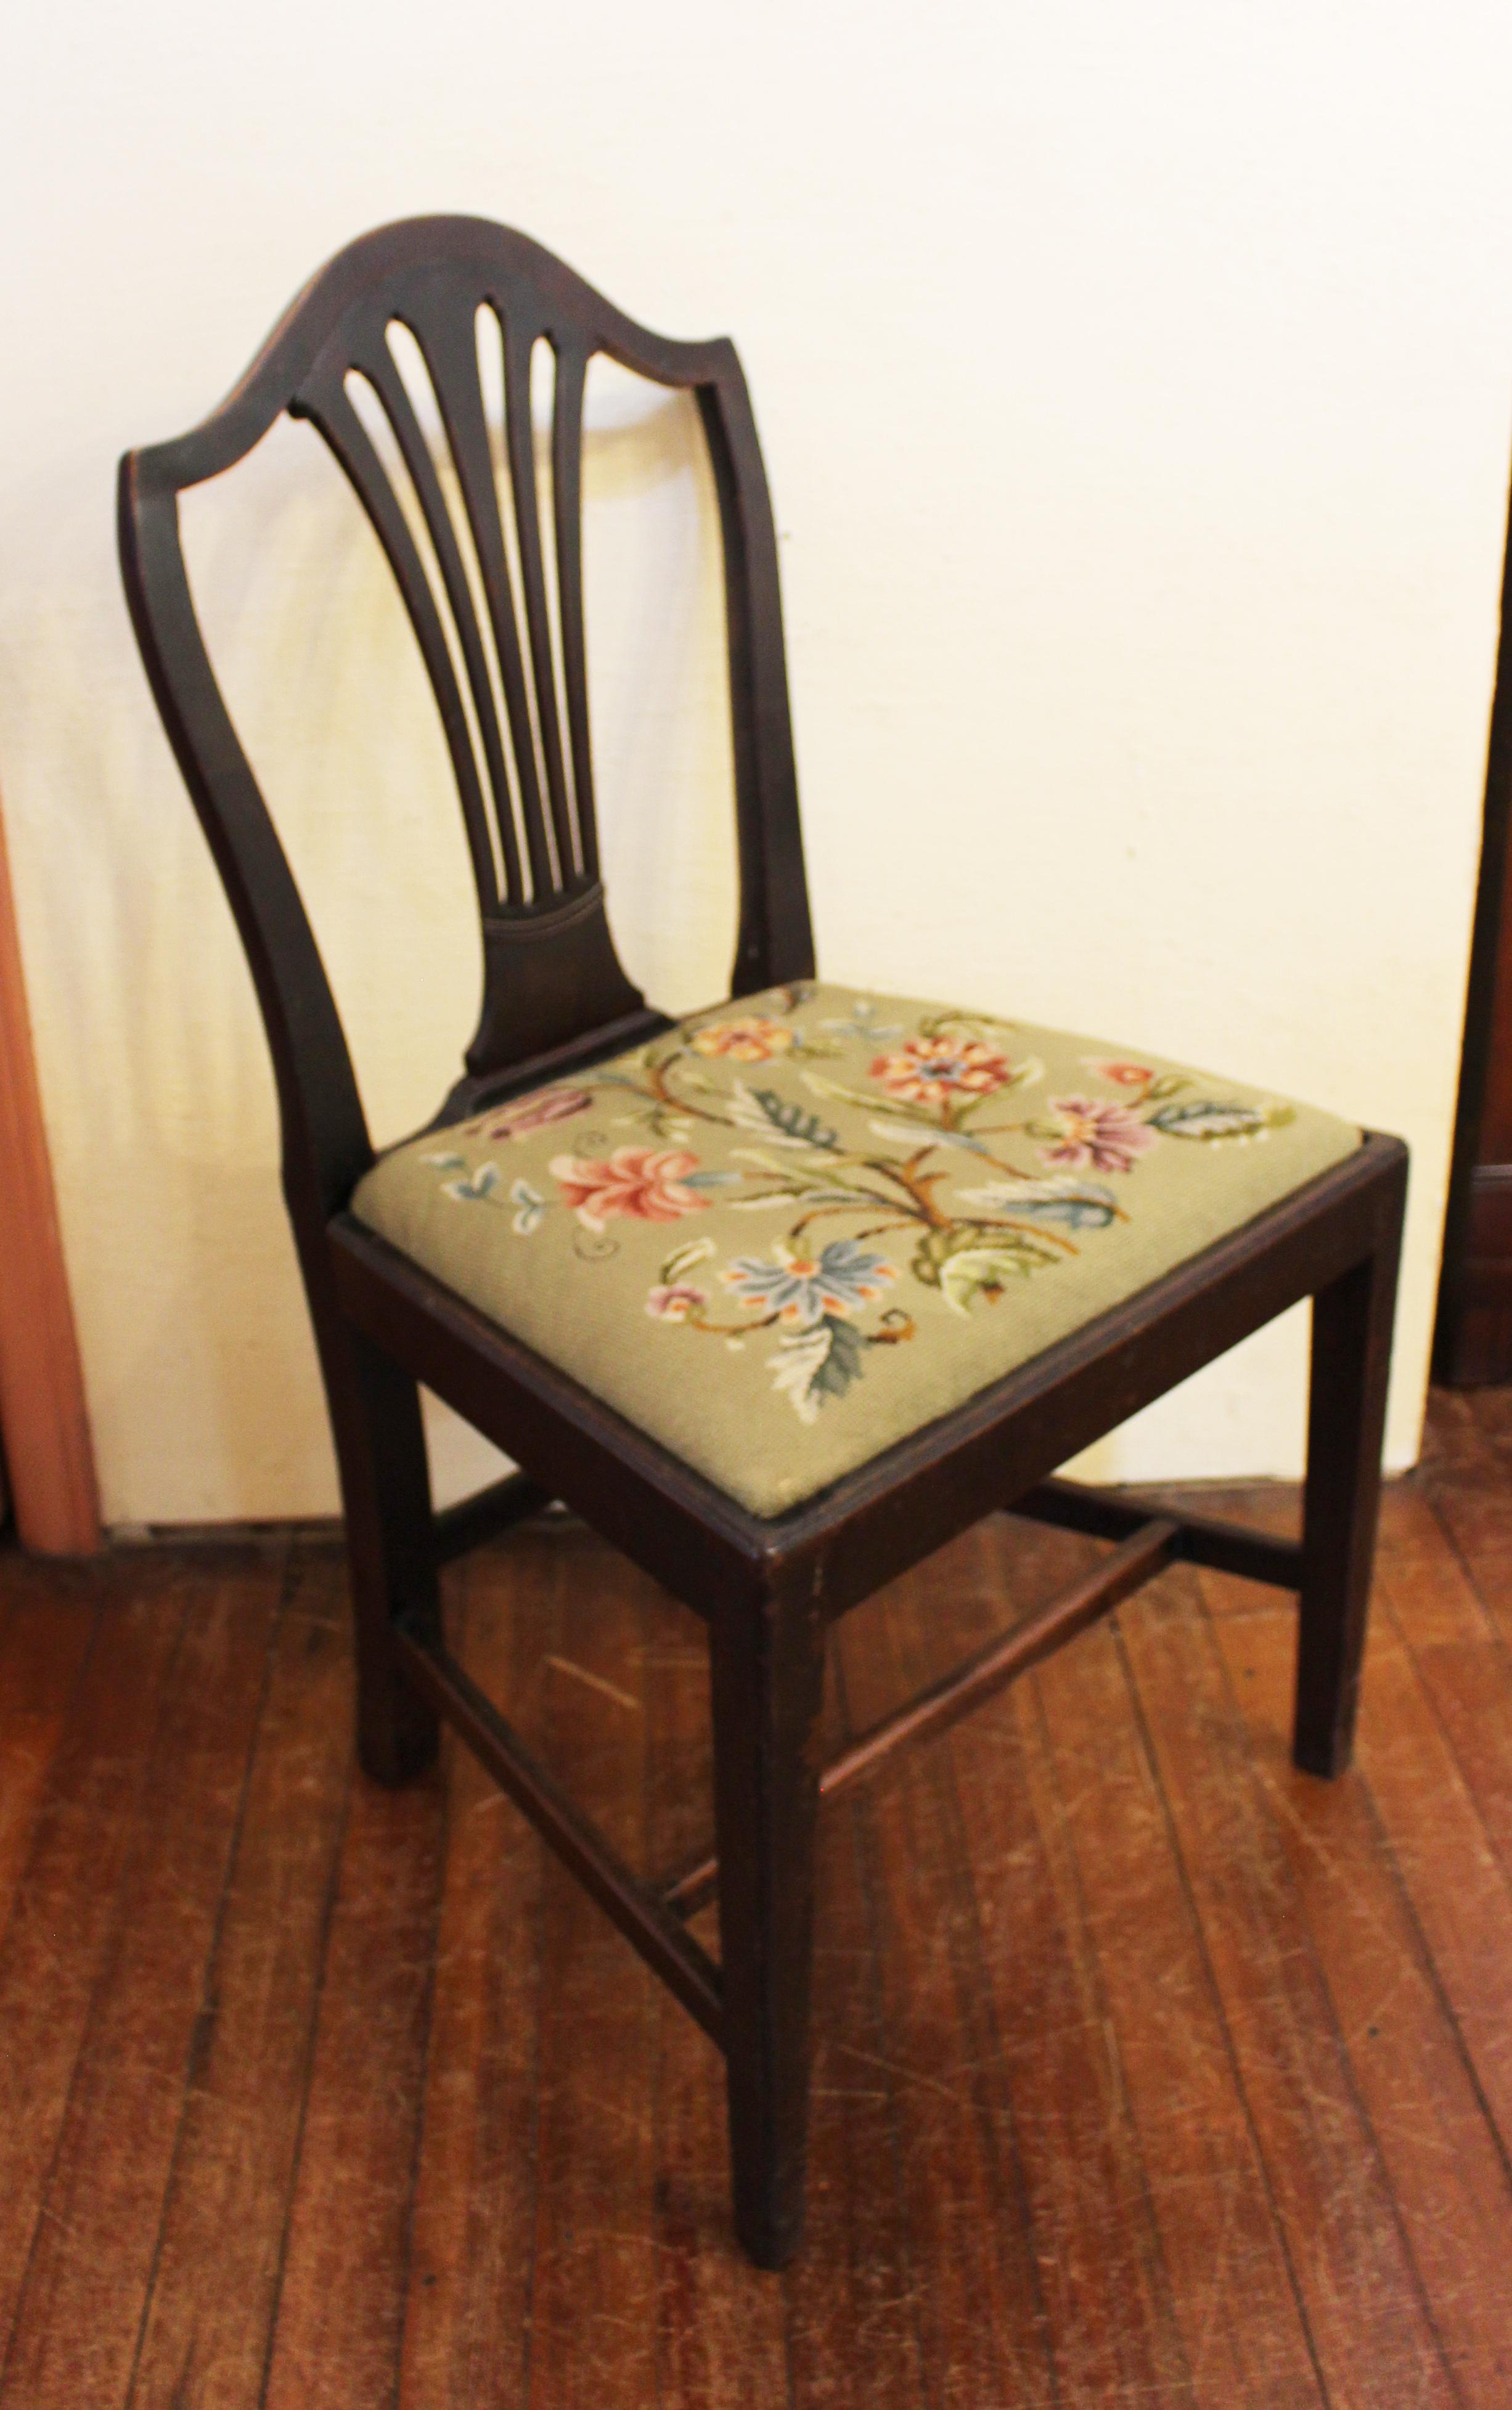 George III Late 18th Century English Mahogany Side Chair with Needlepoint Slip Seat